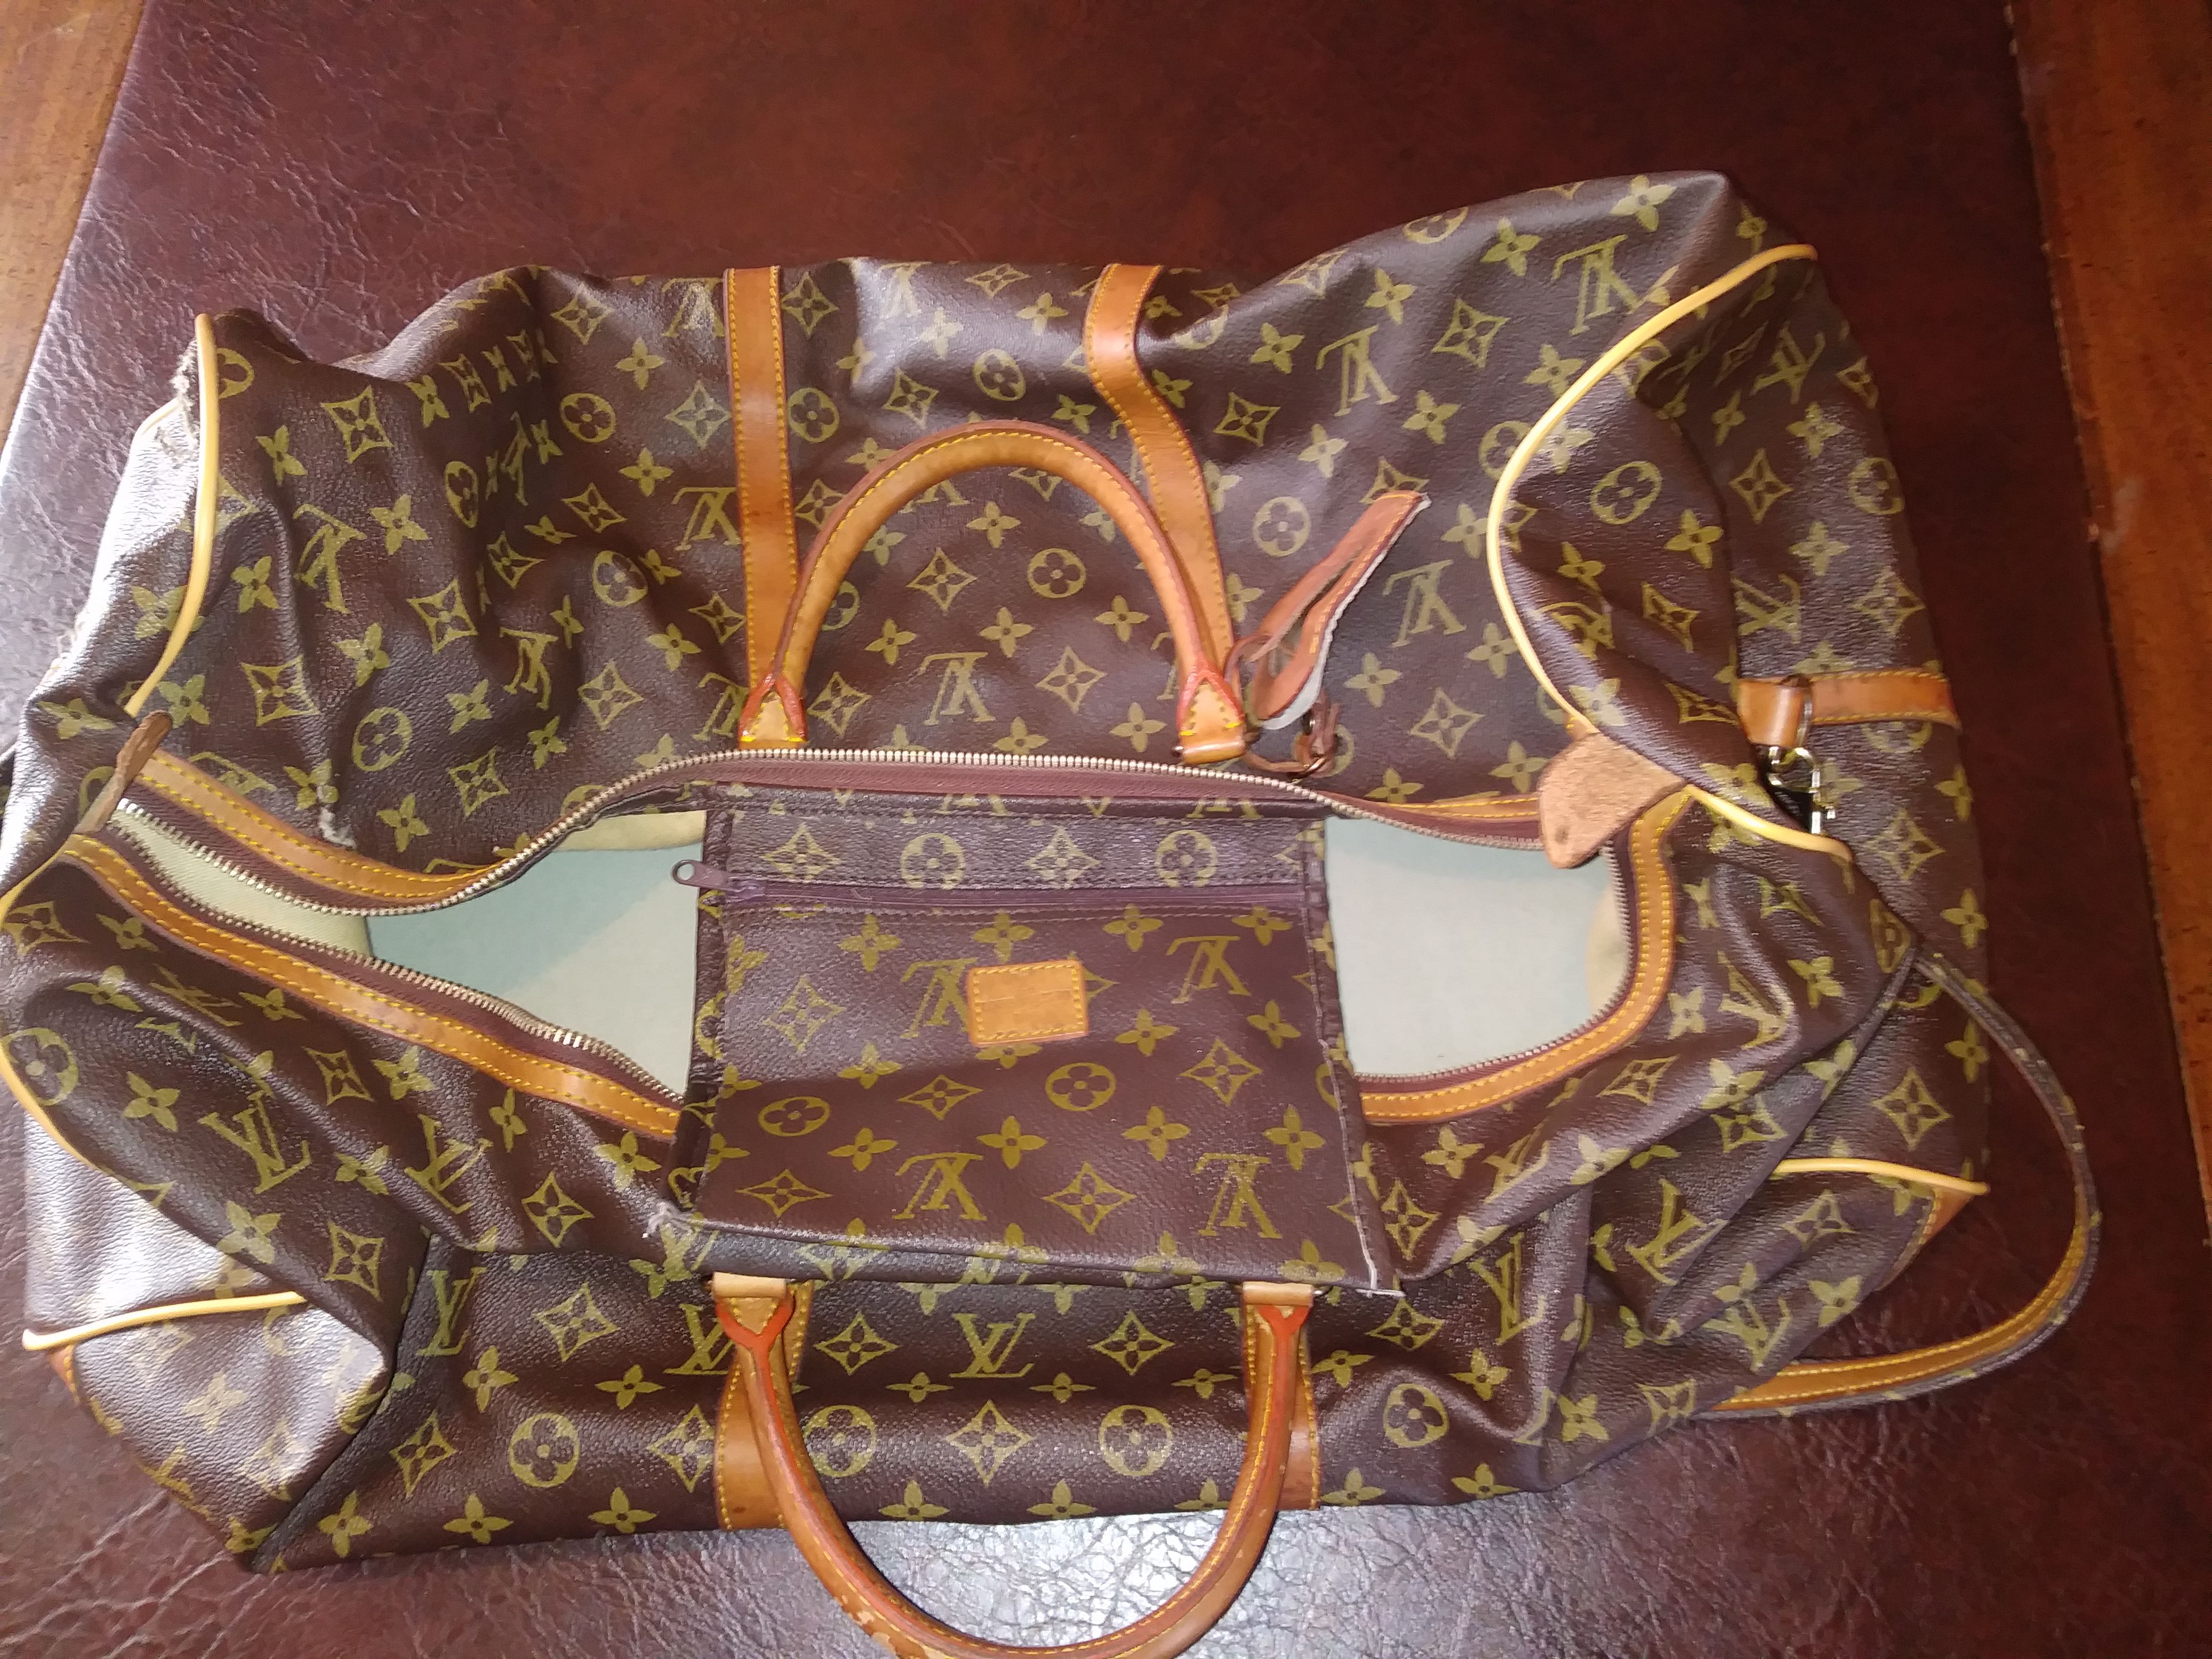 Louis Vuitton Dust Bag Sleeper Envelope Flap Style Travel 22x15” Large for  Sale in Fort Lauderdale, FL - OfferUp